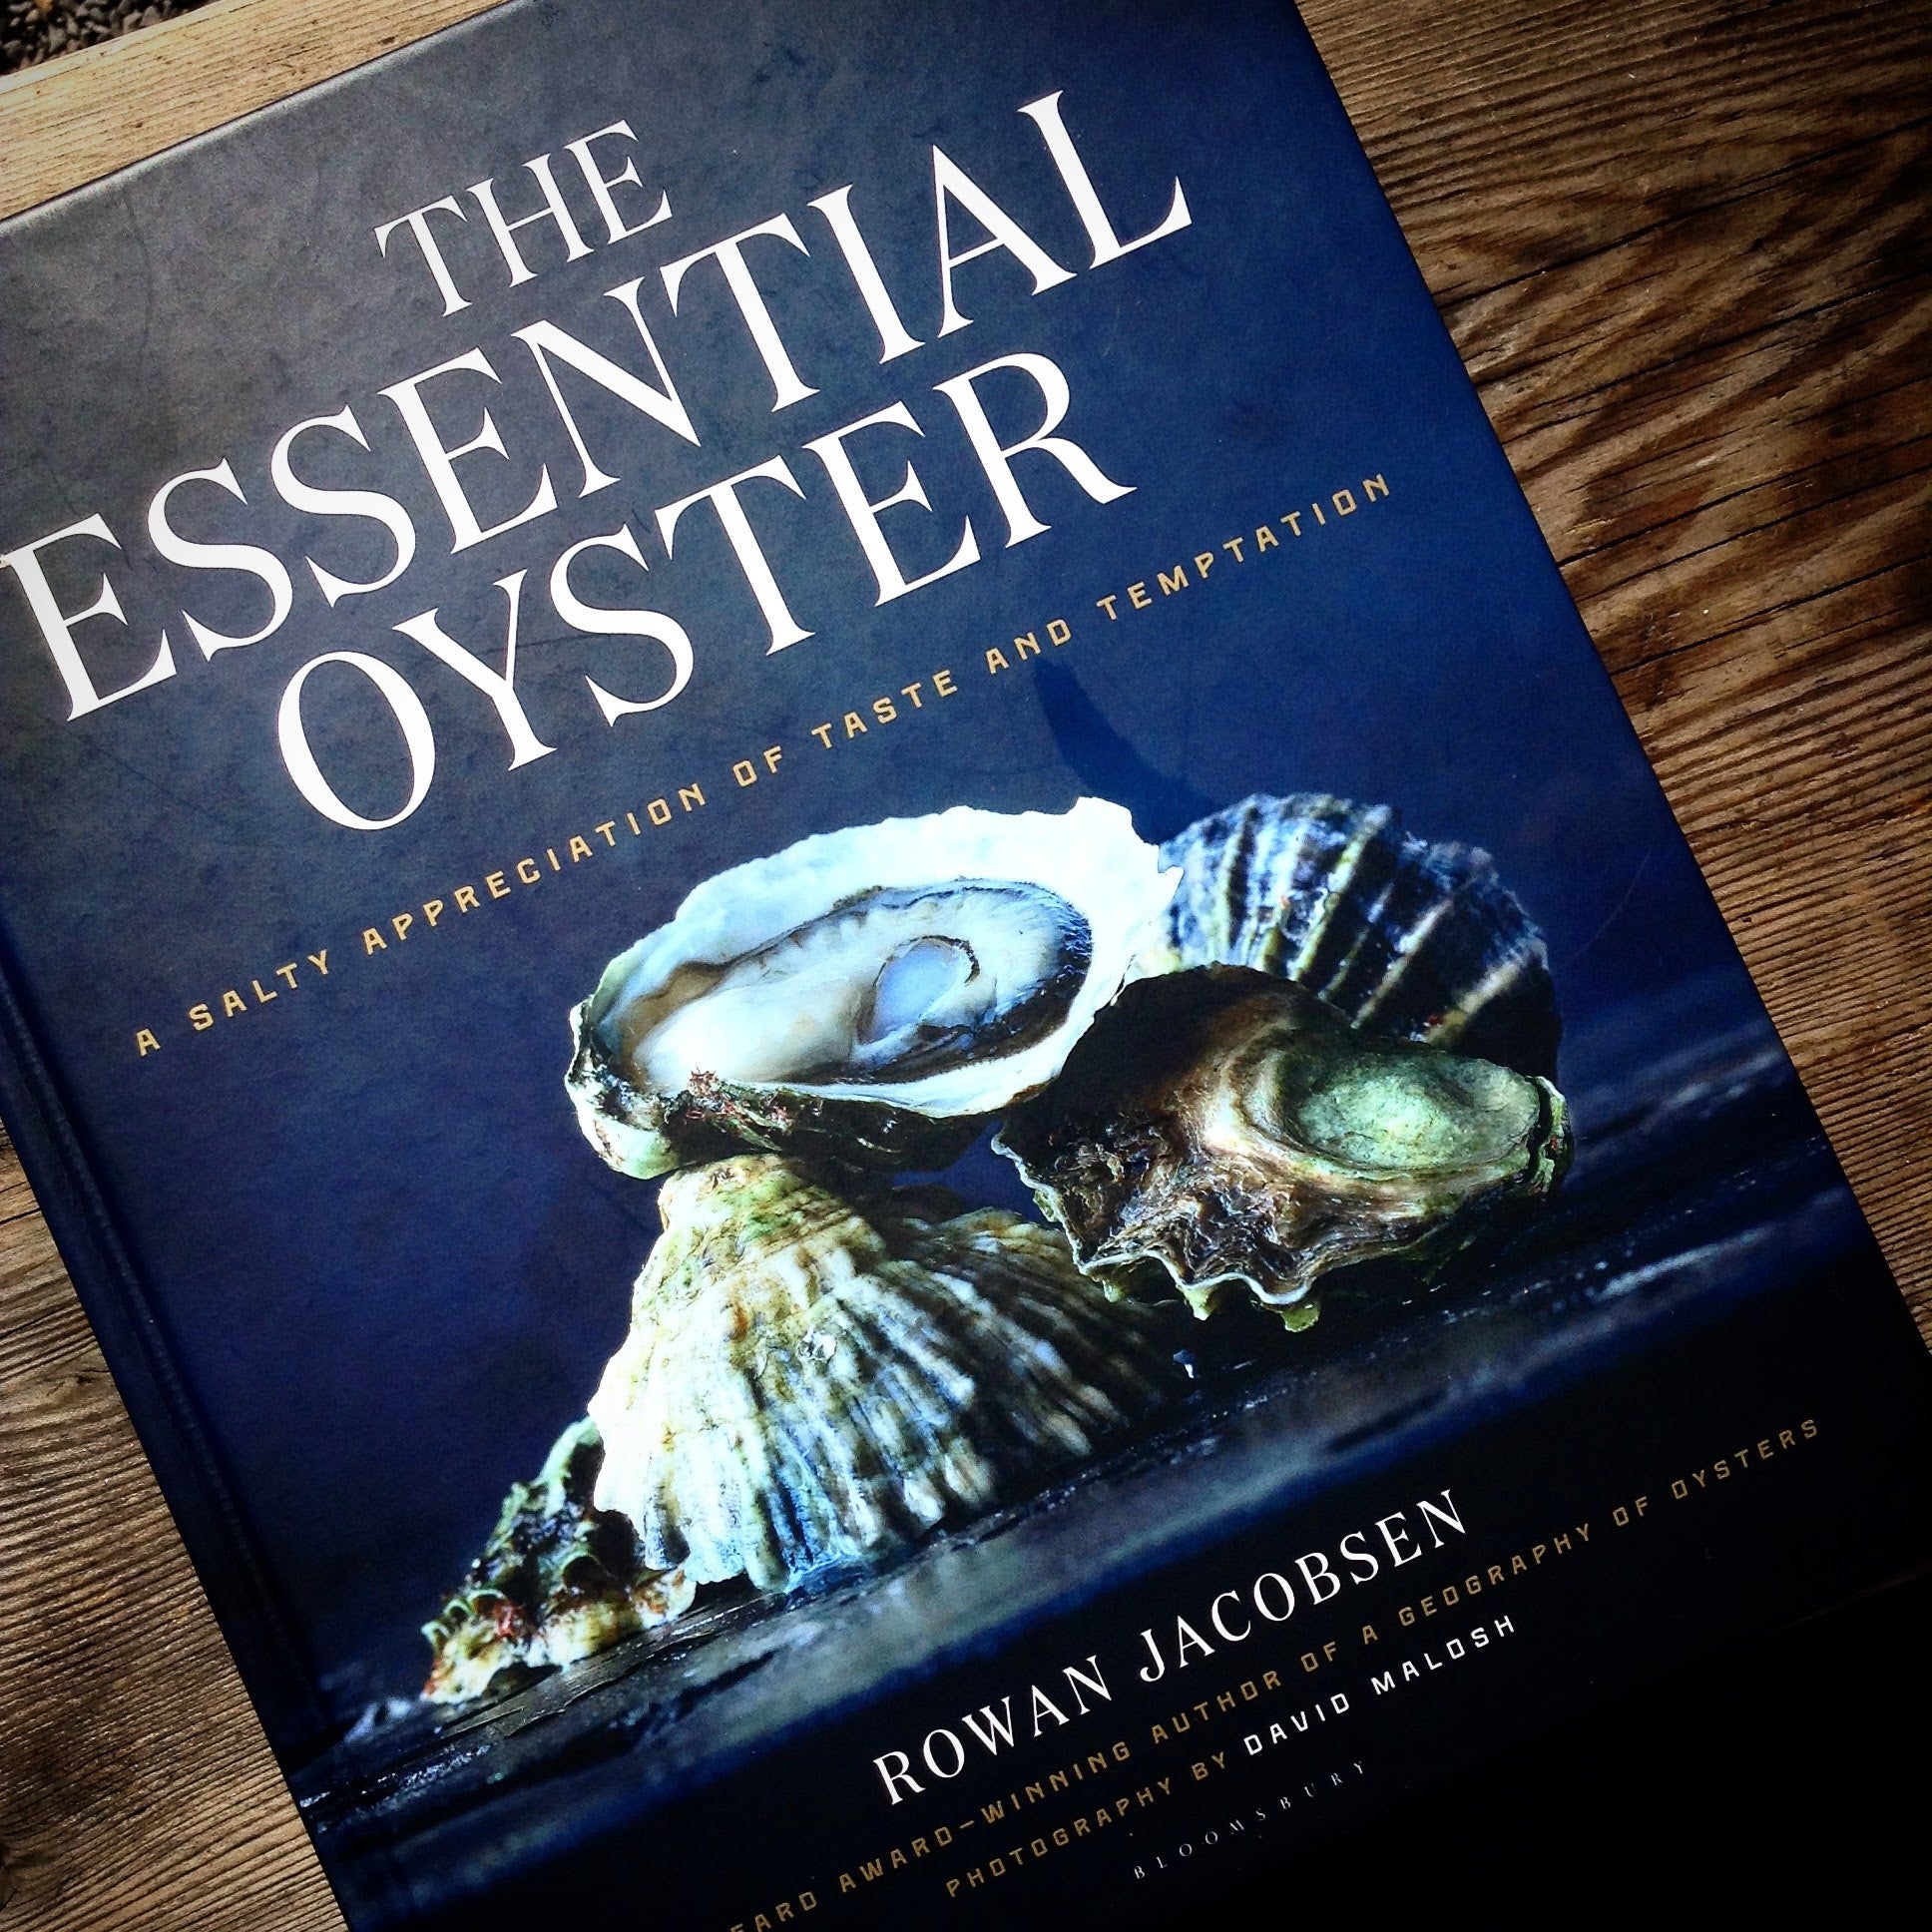 The Essential Oyster - LITTLE CREEK OYSTER FARM & MARKET